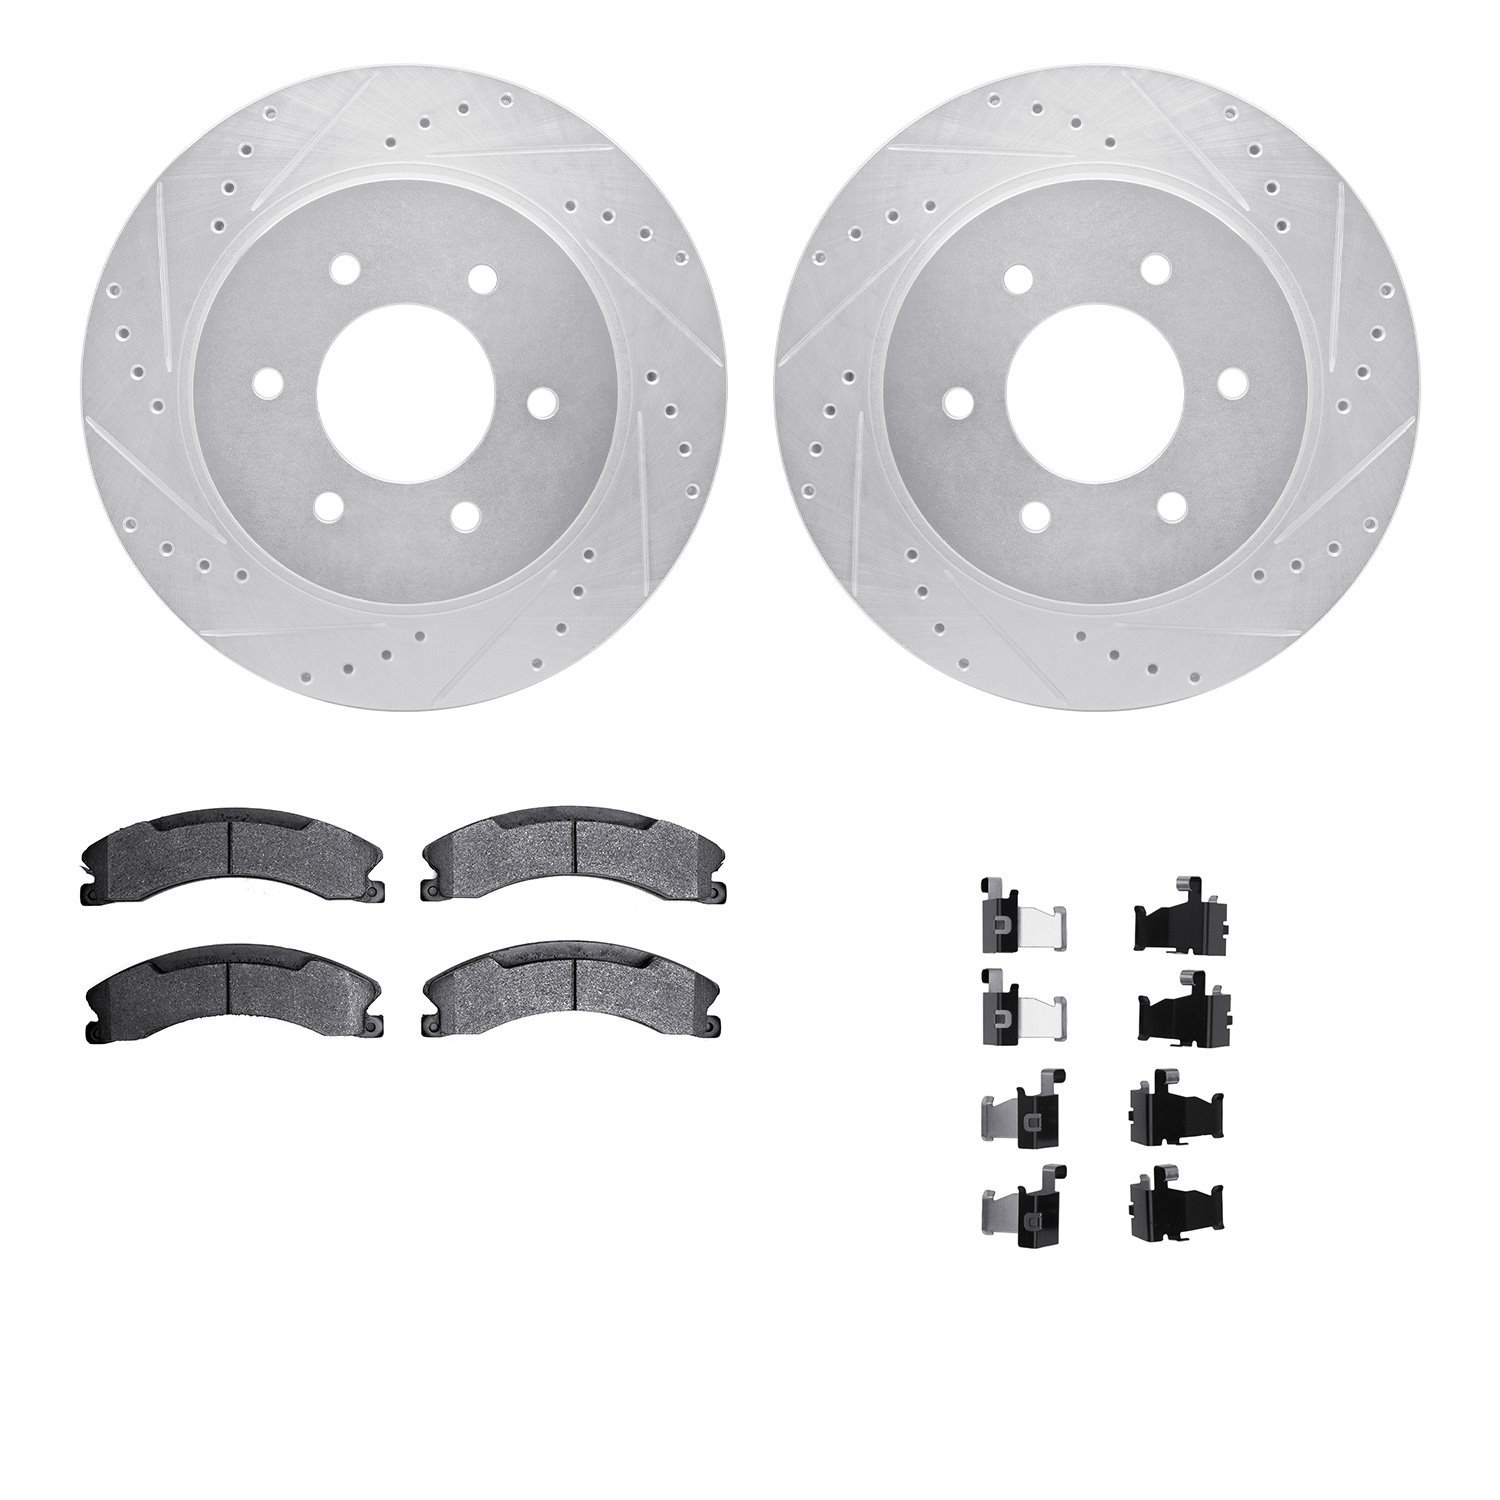 7412-67008 Drilled/Slotted Brake Rotors with Ultimate-Duty Brake Pads Kit & Hardware [Silver], Fits Select Infiniti/Nissan, Posi